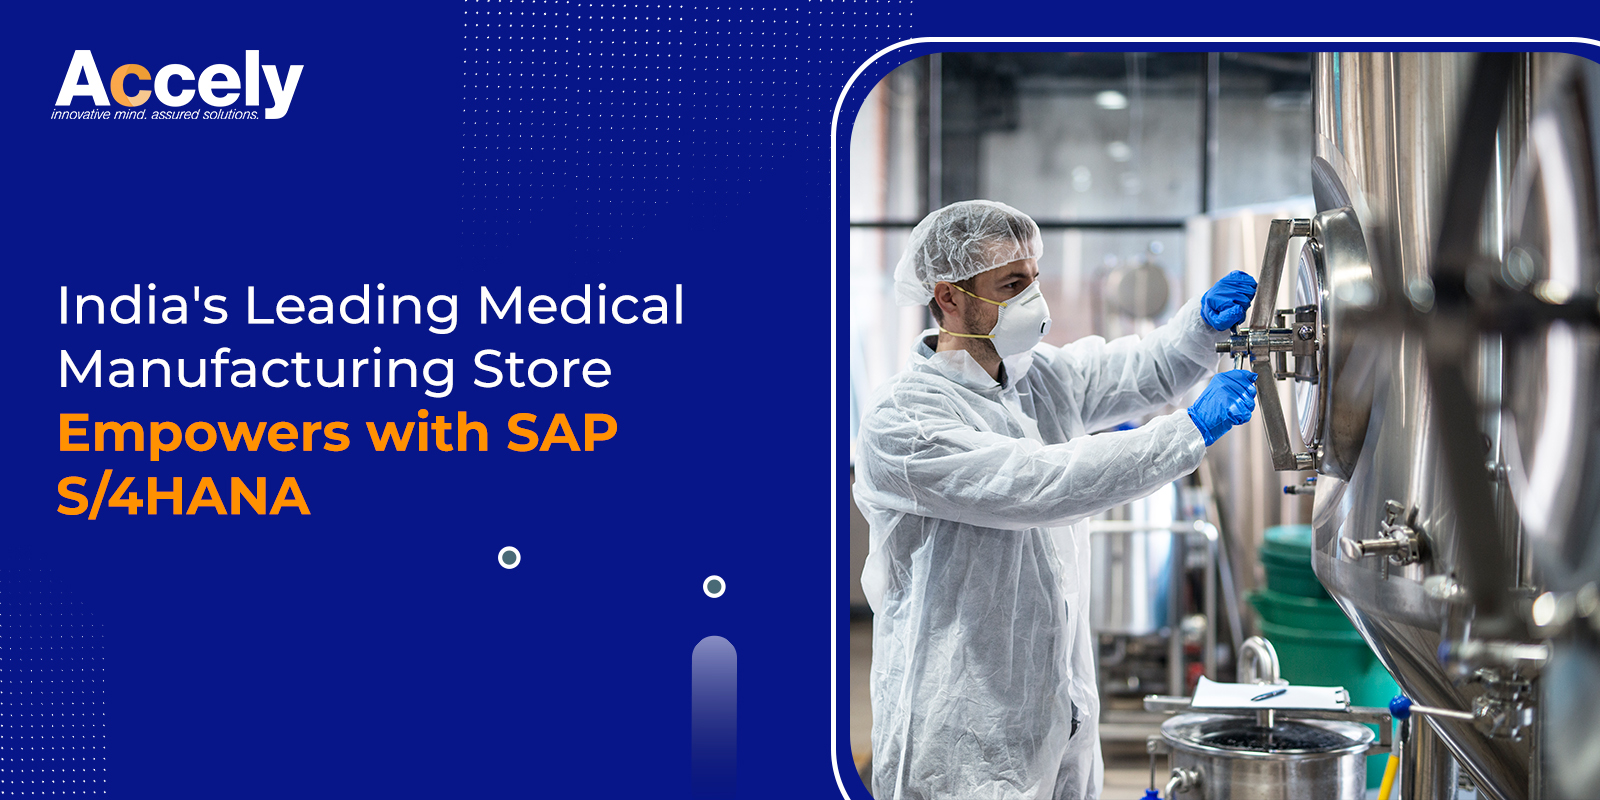 India's Leading Medical Manufacturing Store Empowers with SAP S/4HANA